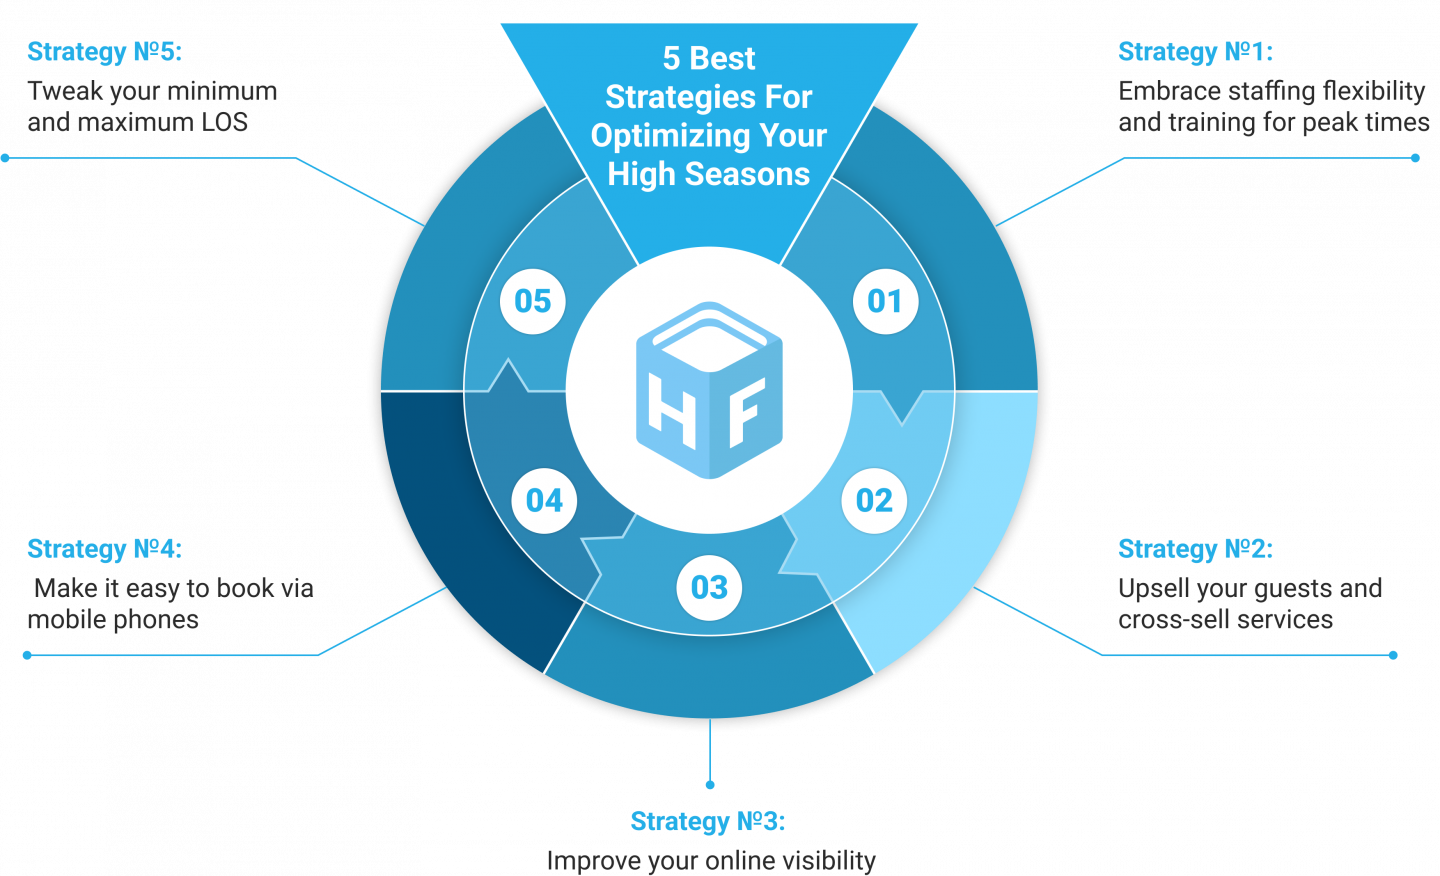 5 best strategies for optimizing your high seasons